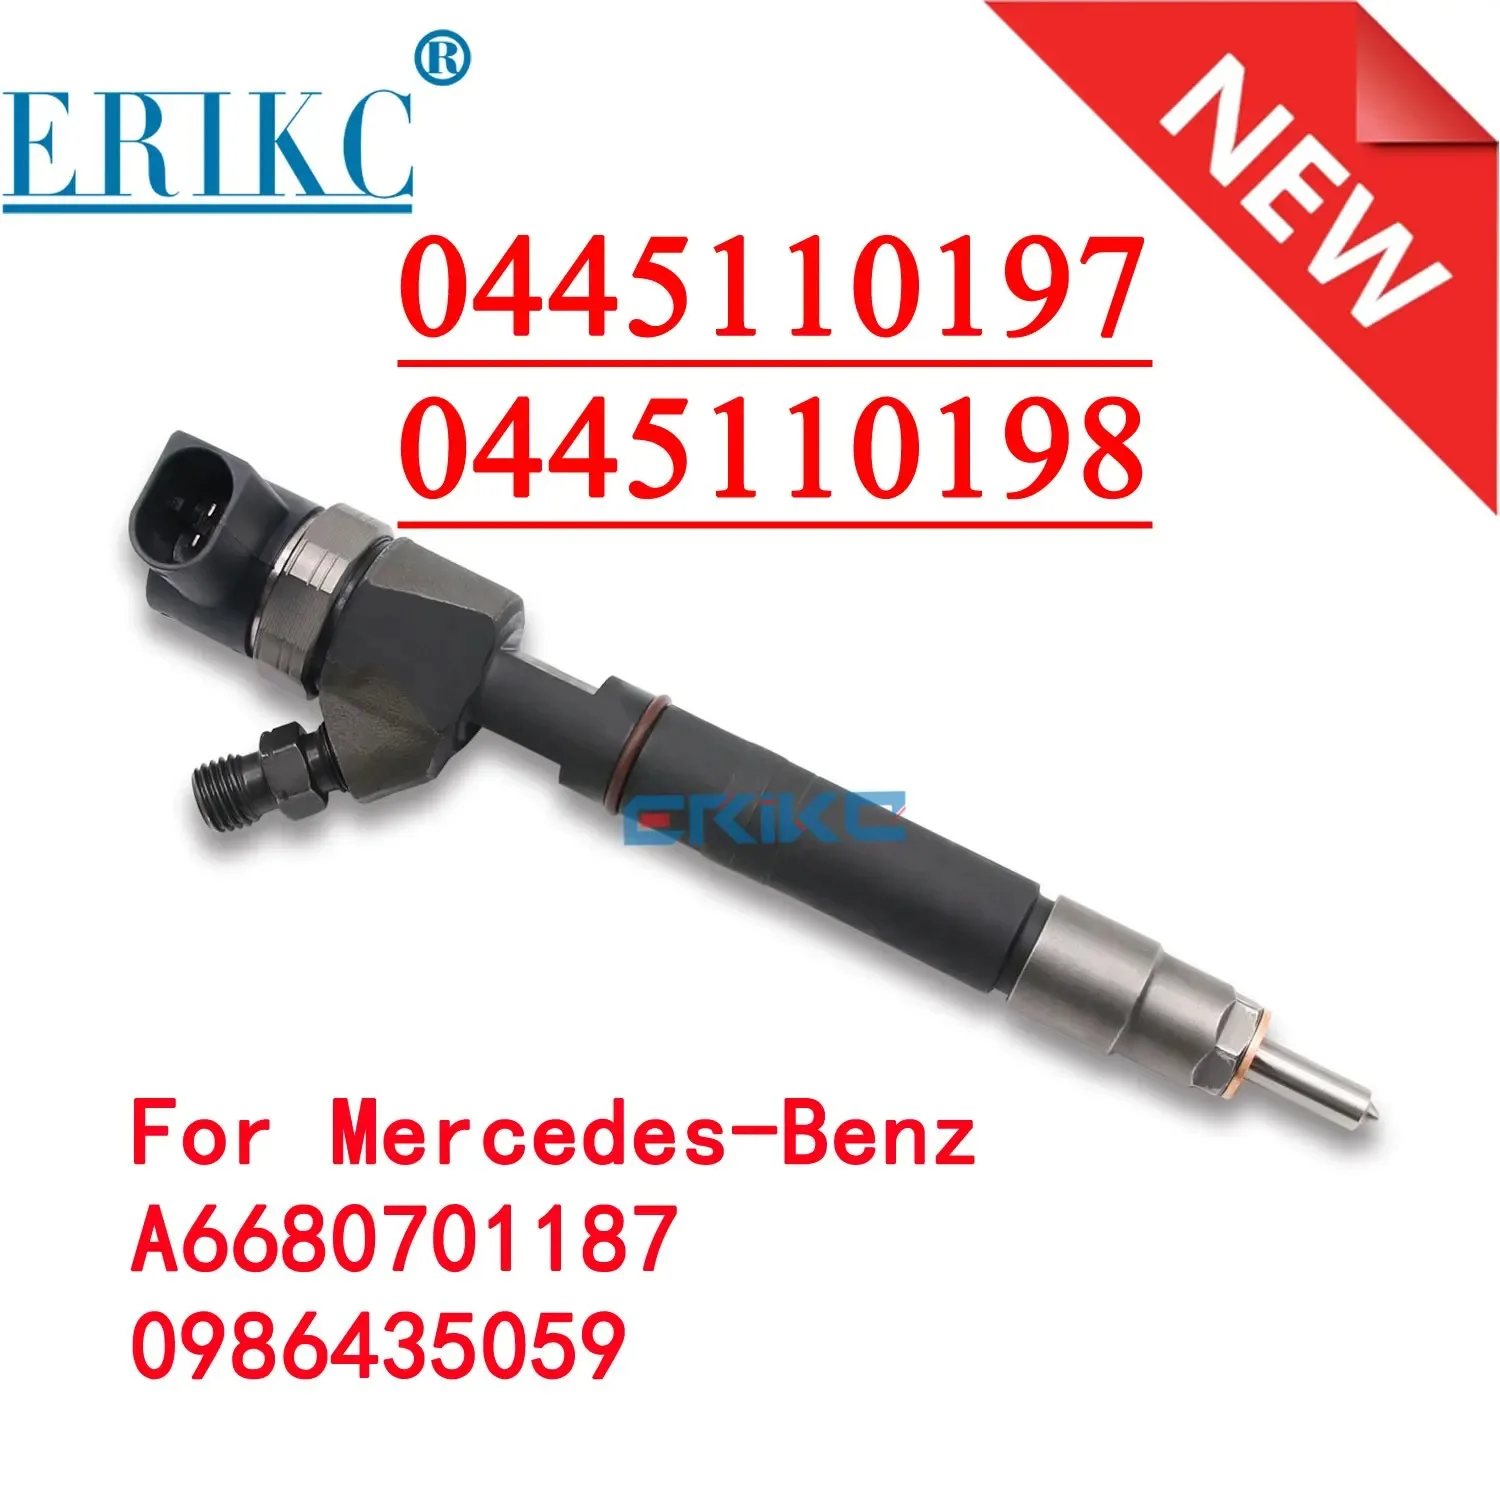 

0445110197 0445110198 Fuel Injection Jet A6680701187 Diesel Injector Sprayer 0 445 110 197 for Mercedes-Benz 0986435059